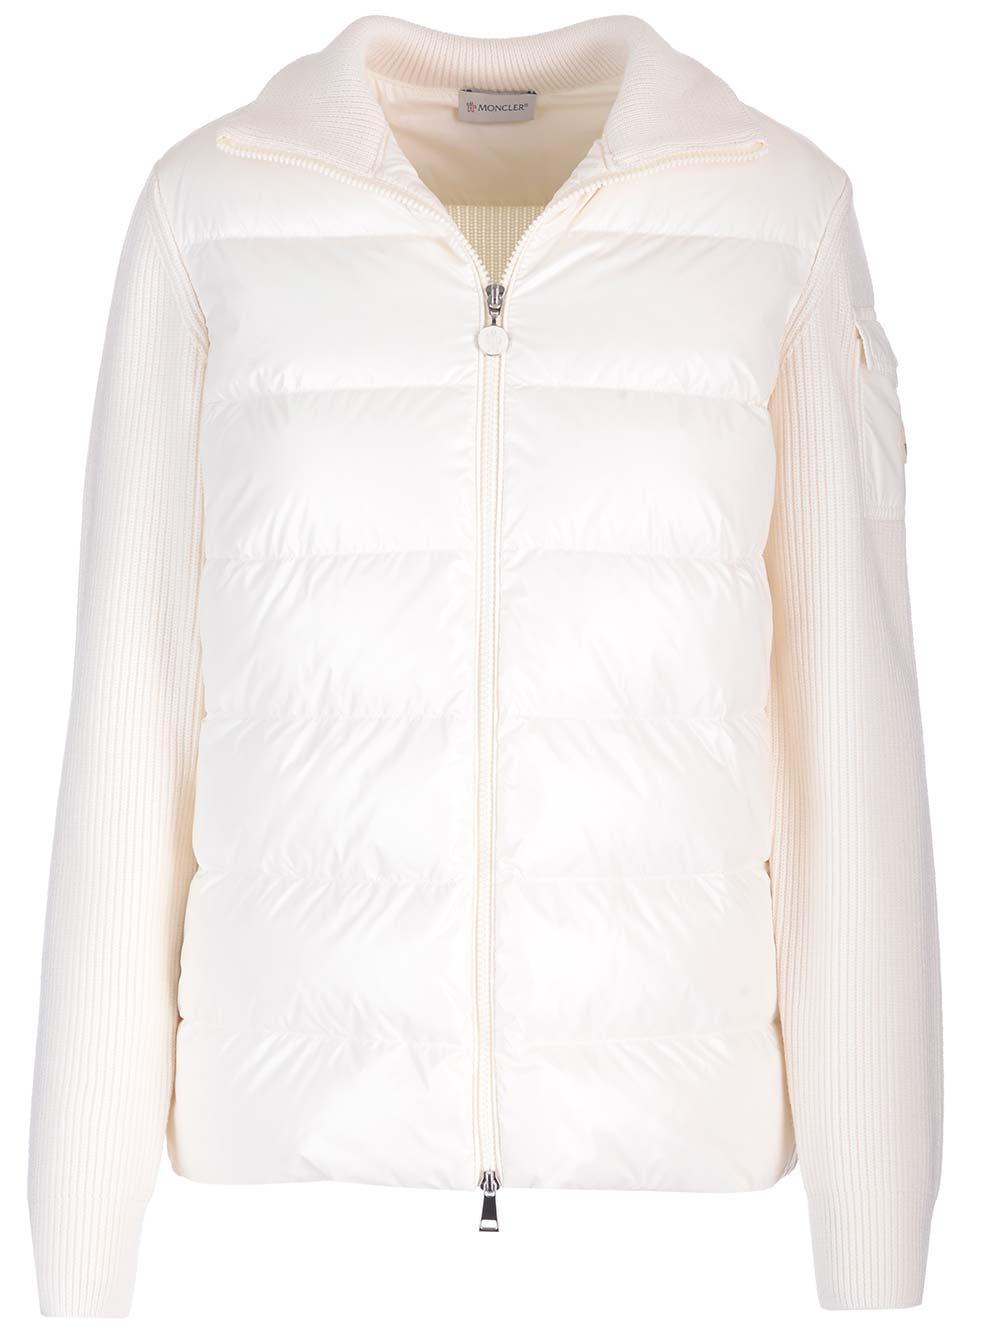 Moncler Sweatshirt With Zip And Padding in White | Lyst